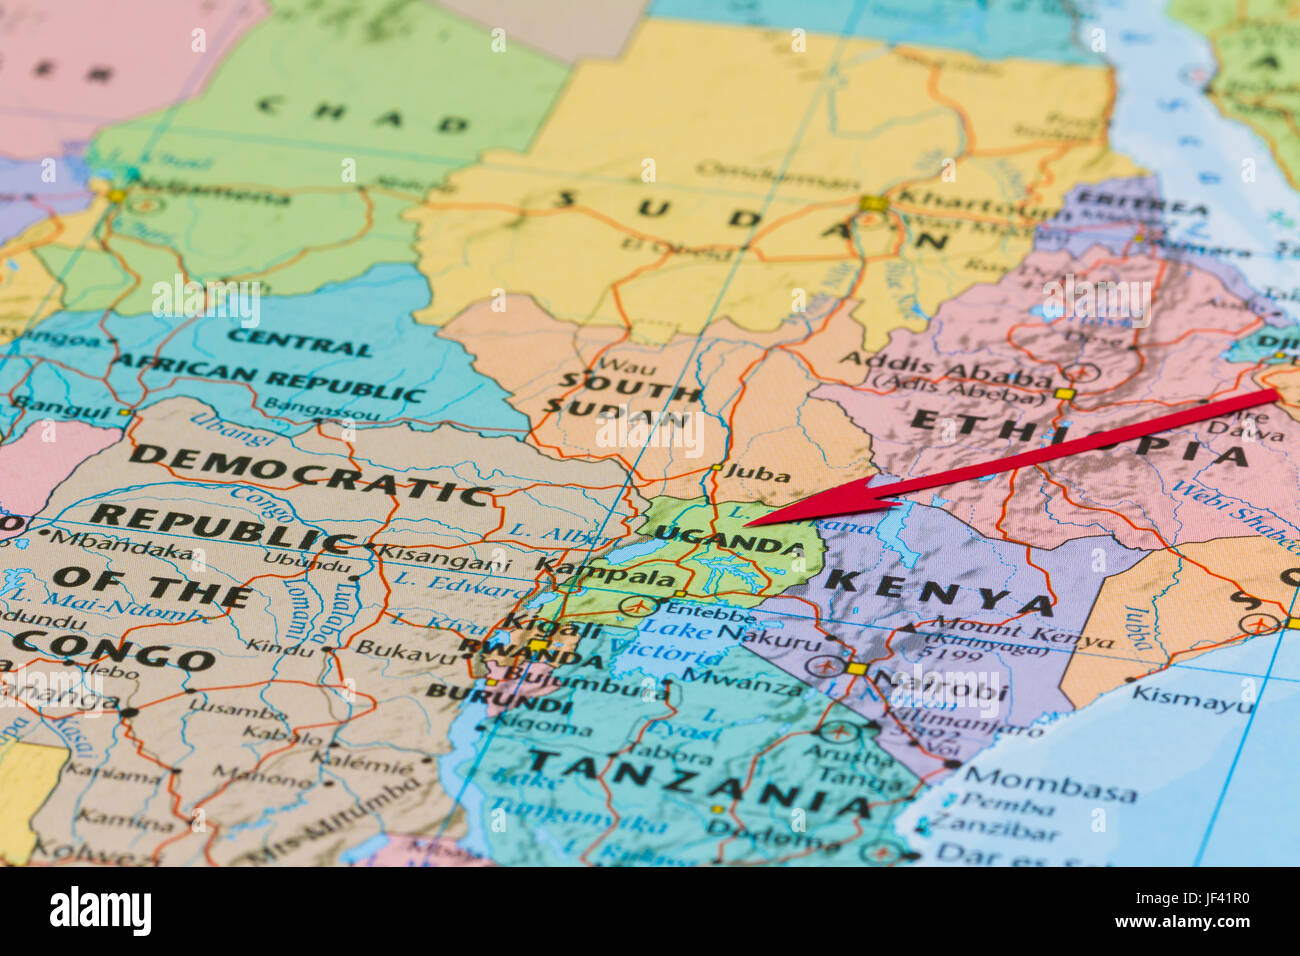 Photo of Uganda. Country indicated by red arrow. Country on African continent. Stock Photo